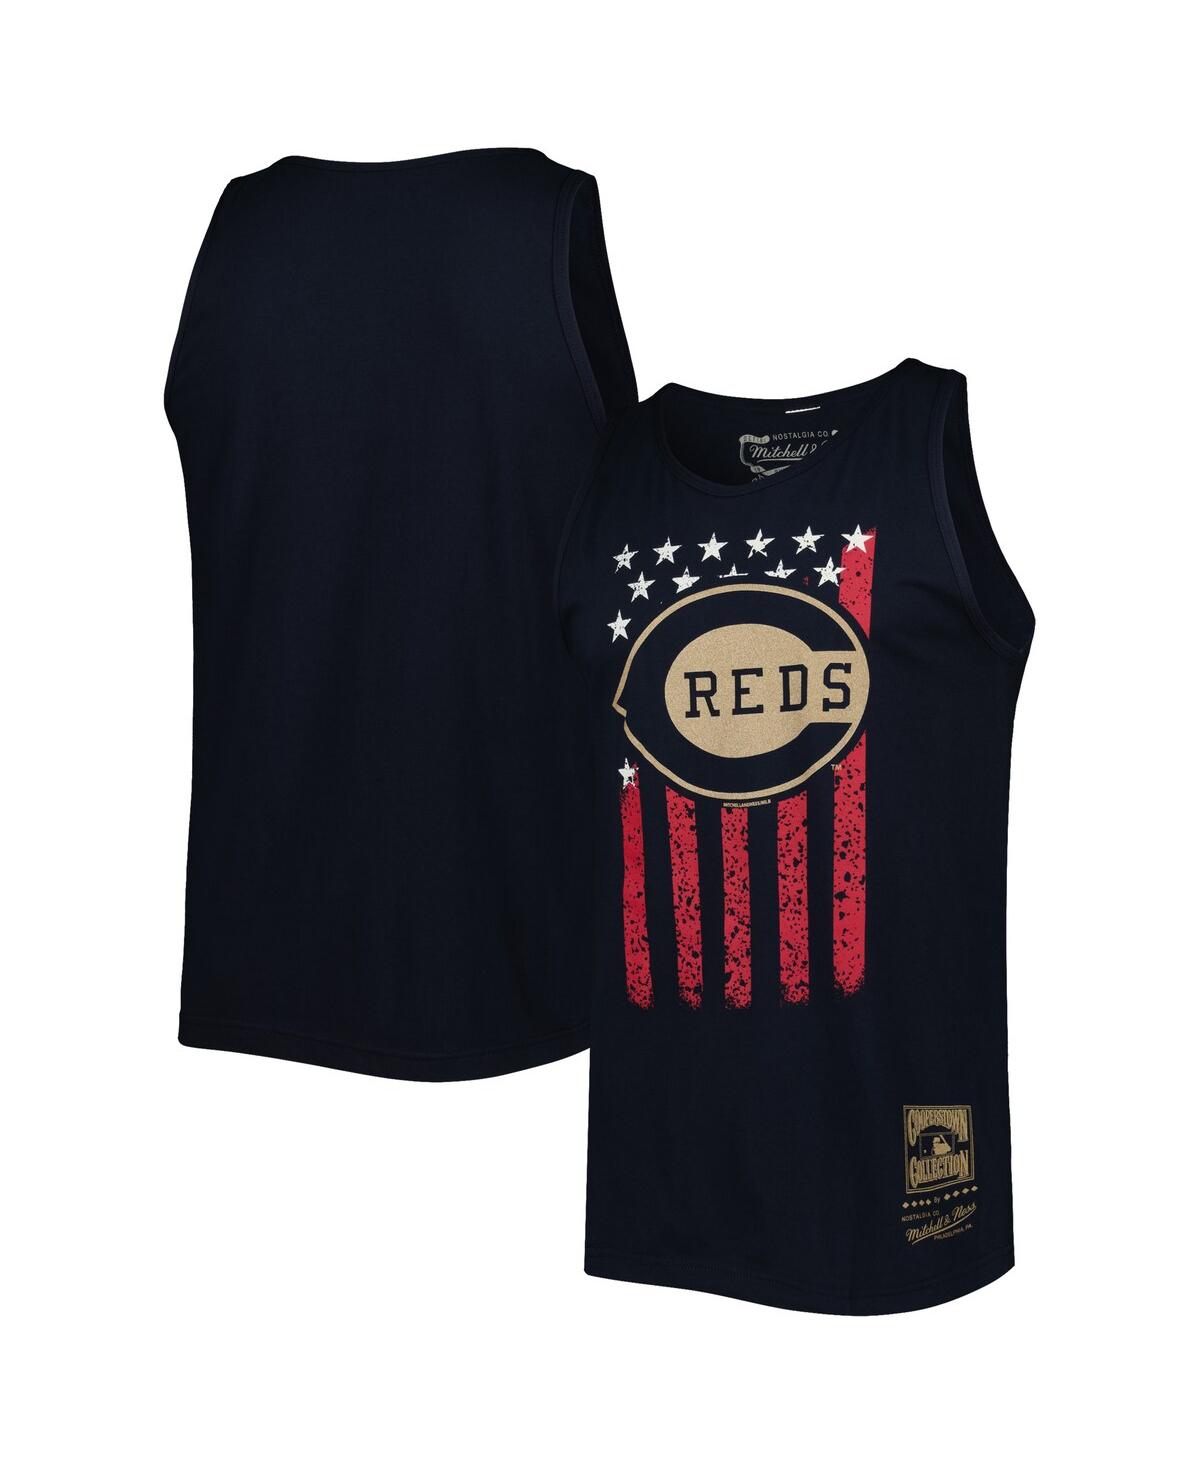 MITCHELL & NESS MEN'S MITCHELL & NESS NAVY CINCINNATI REDS COOPERSTOWN COLLECTION STARS AND STRIPES TANK TOP